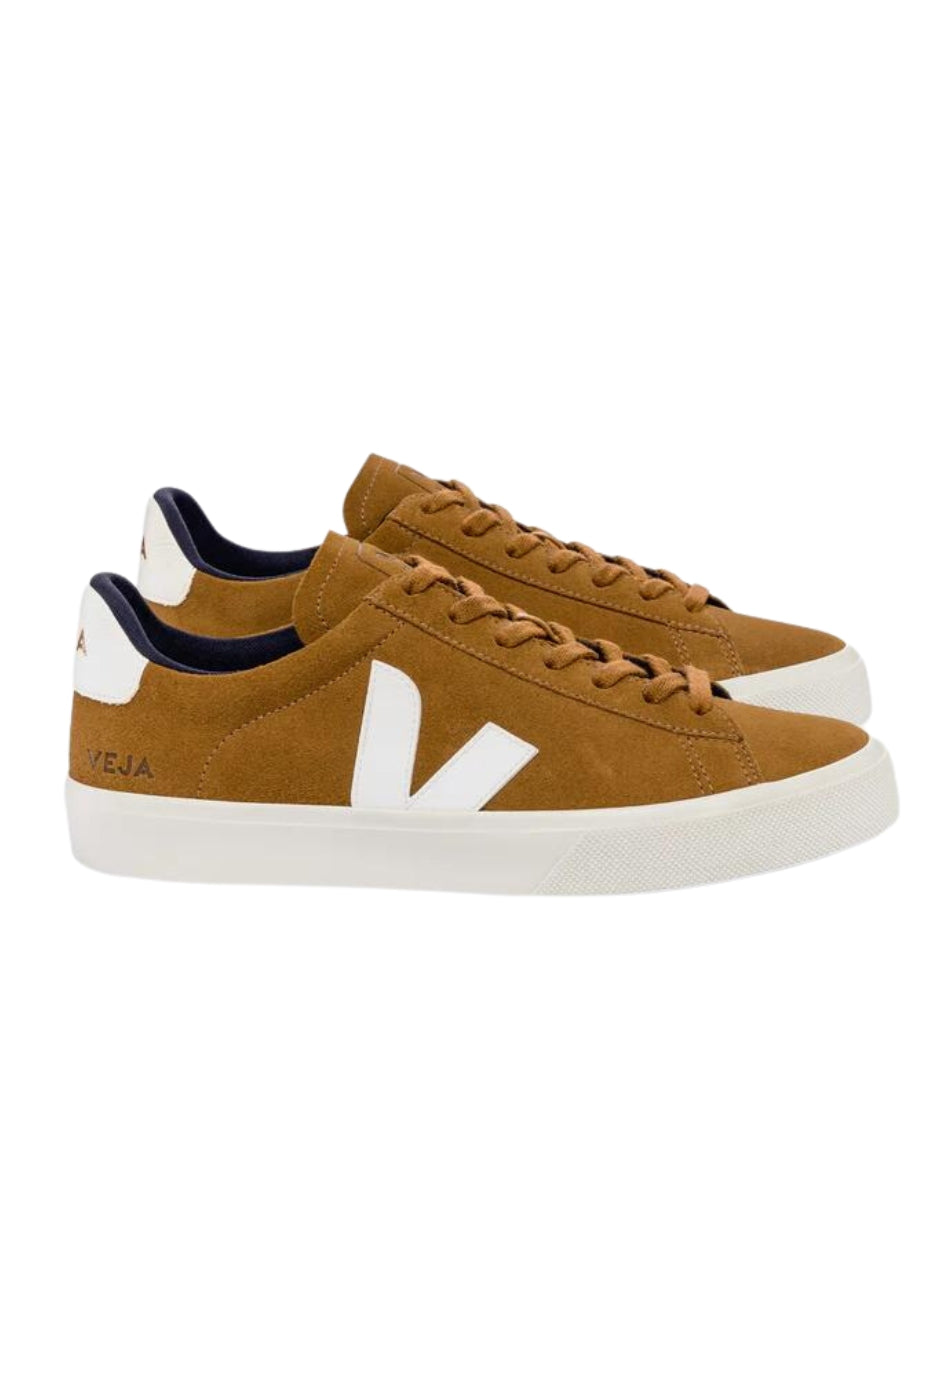 Campo Suede - Camel/White-VEJA-P&K The General Store